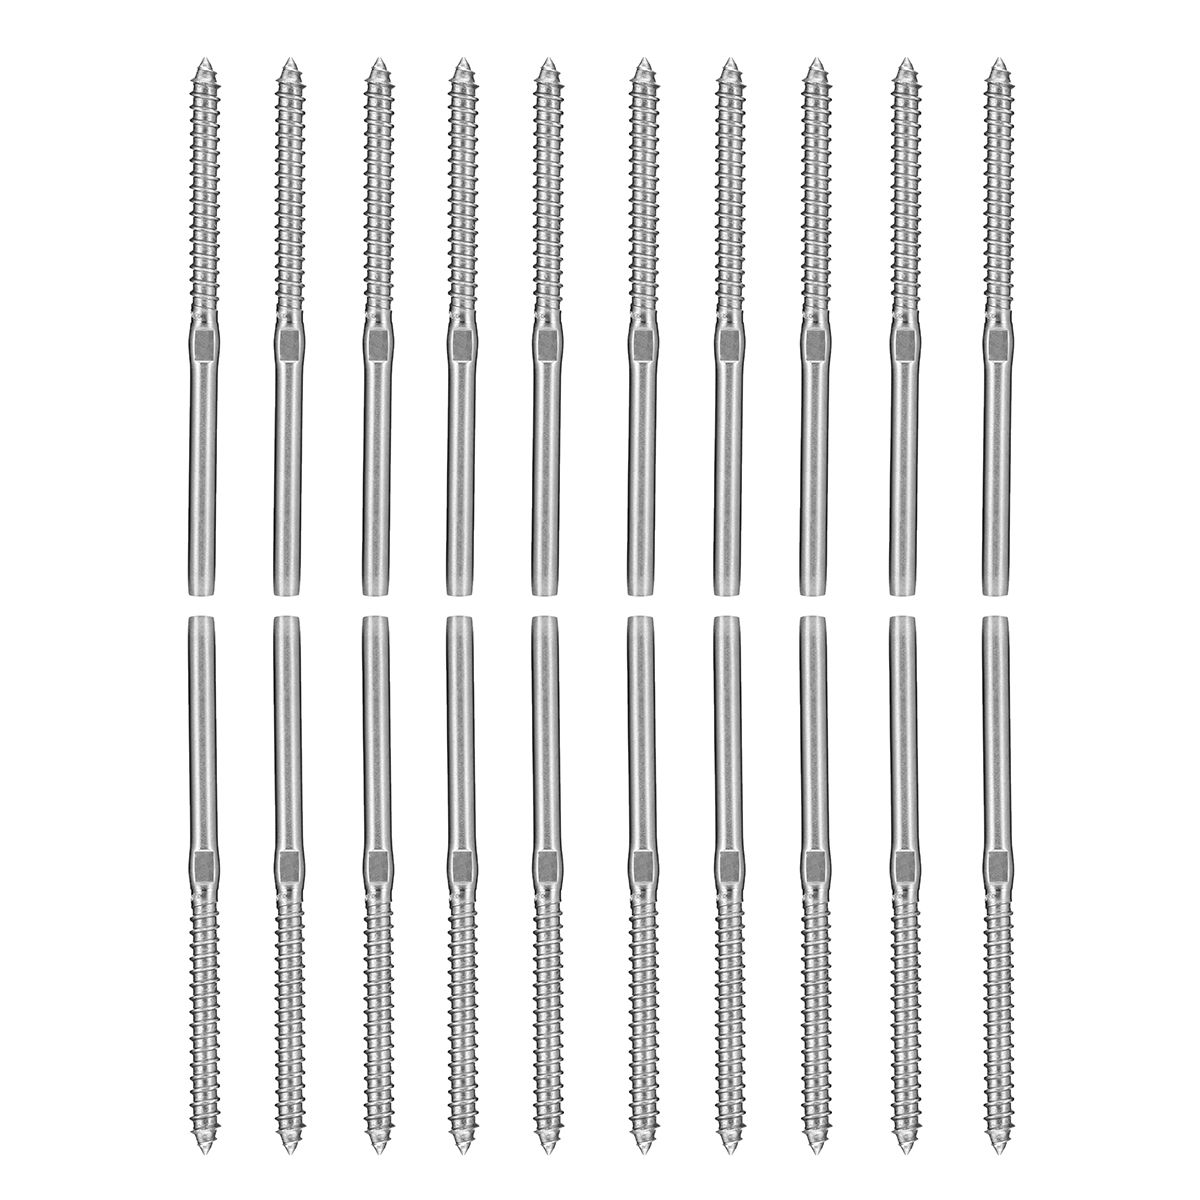 20Pcs-Left-Hand-therad-Steel-Wire-Rope-Balustrade-Kit-Lag-Screw-Terminal-Swage-32mm-for-18quot-Cable-1310035